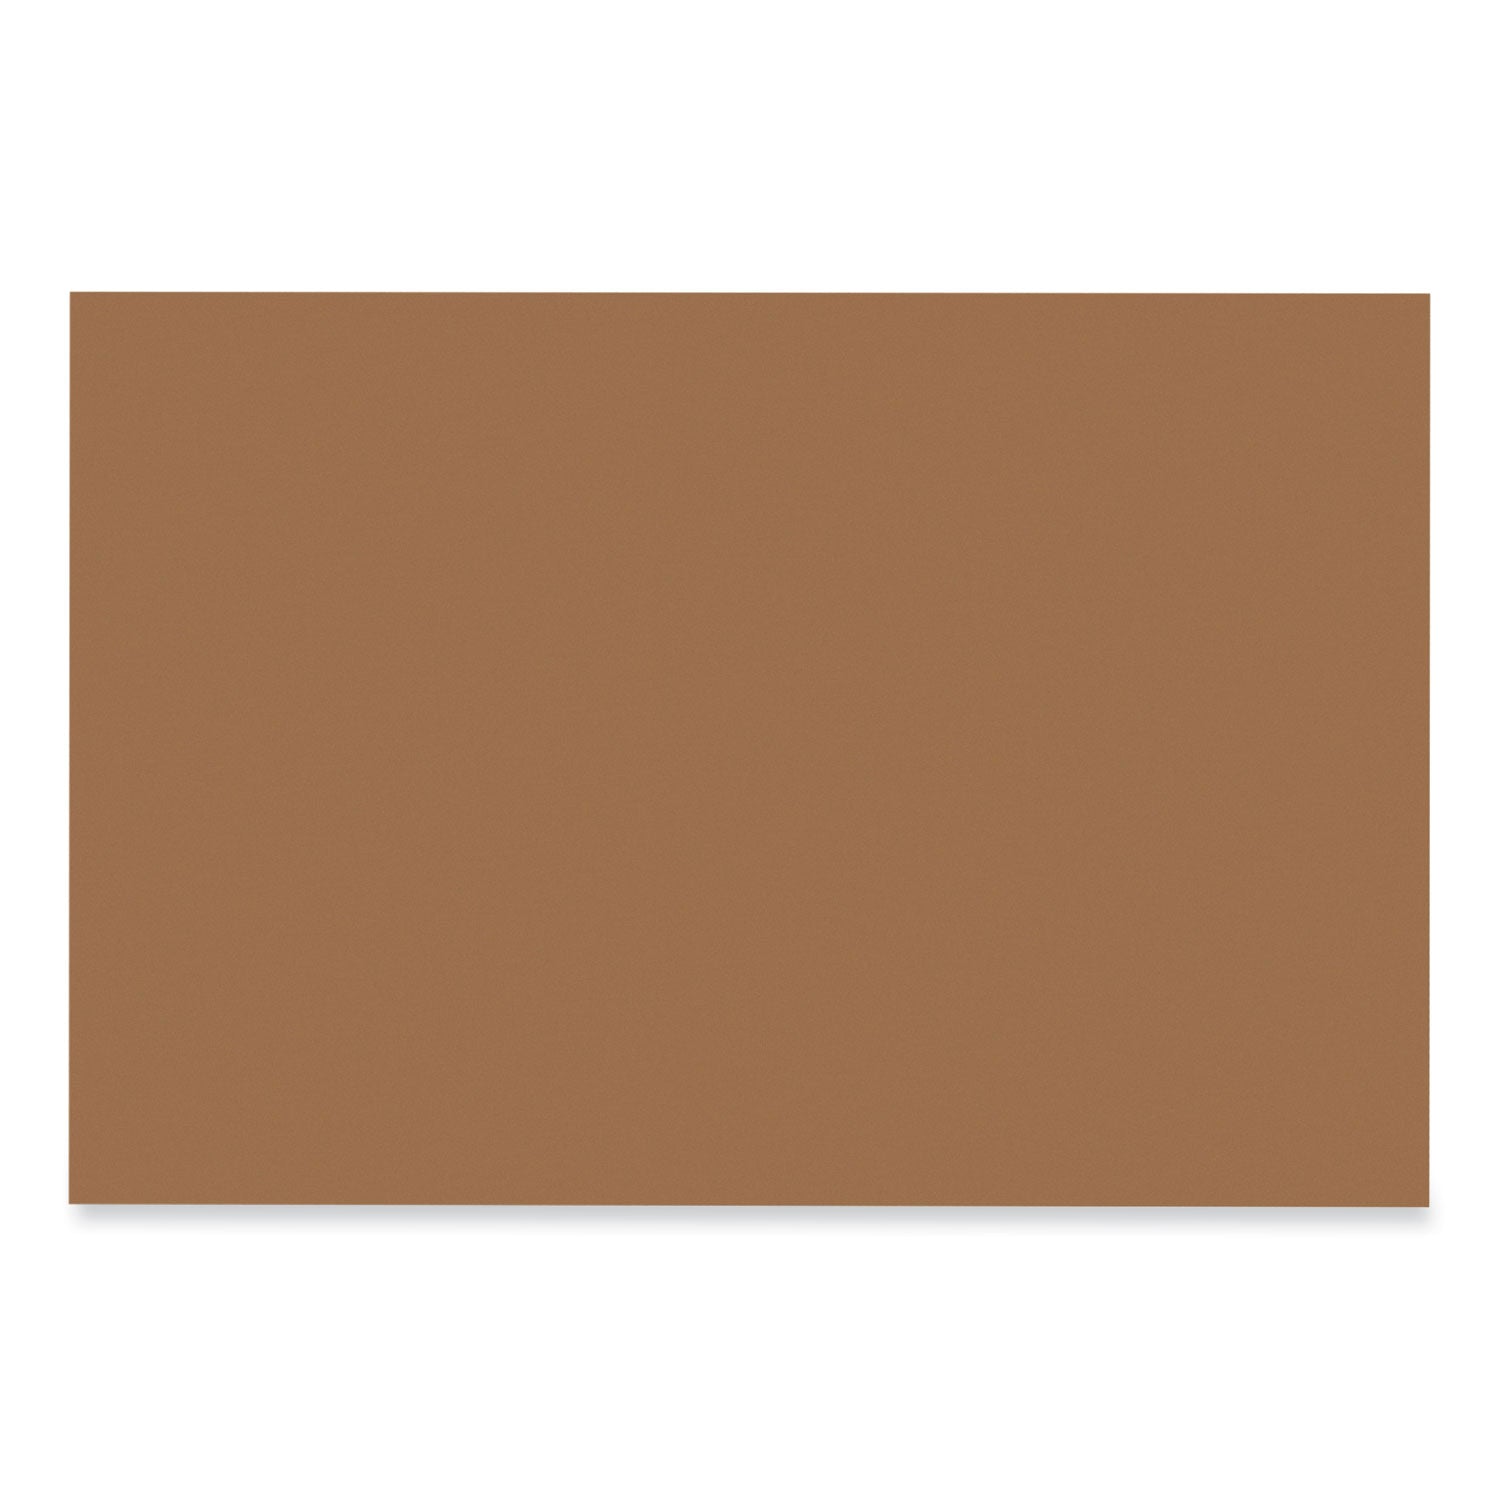 SunWorks Construction Paper, 50 lb Text Weight, 12 x 18, Light Brown, 50/Pack - 